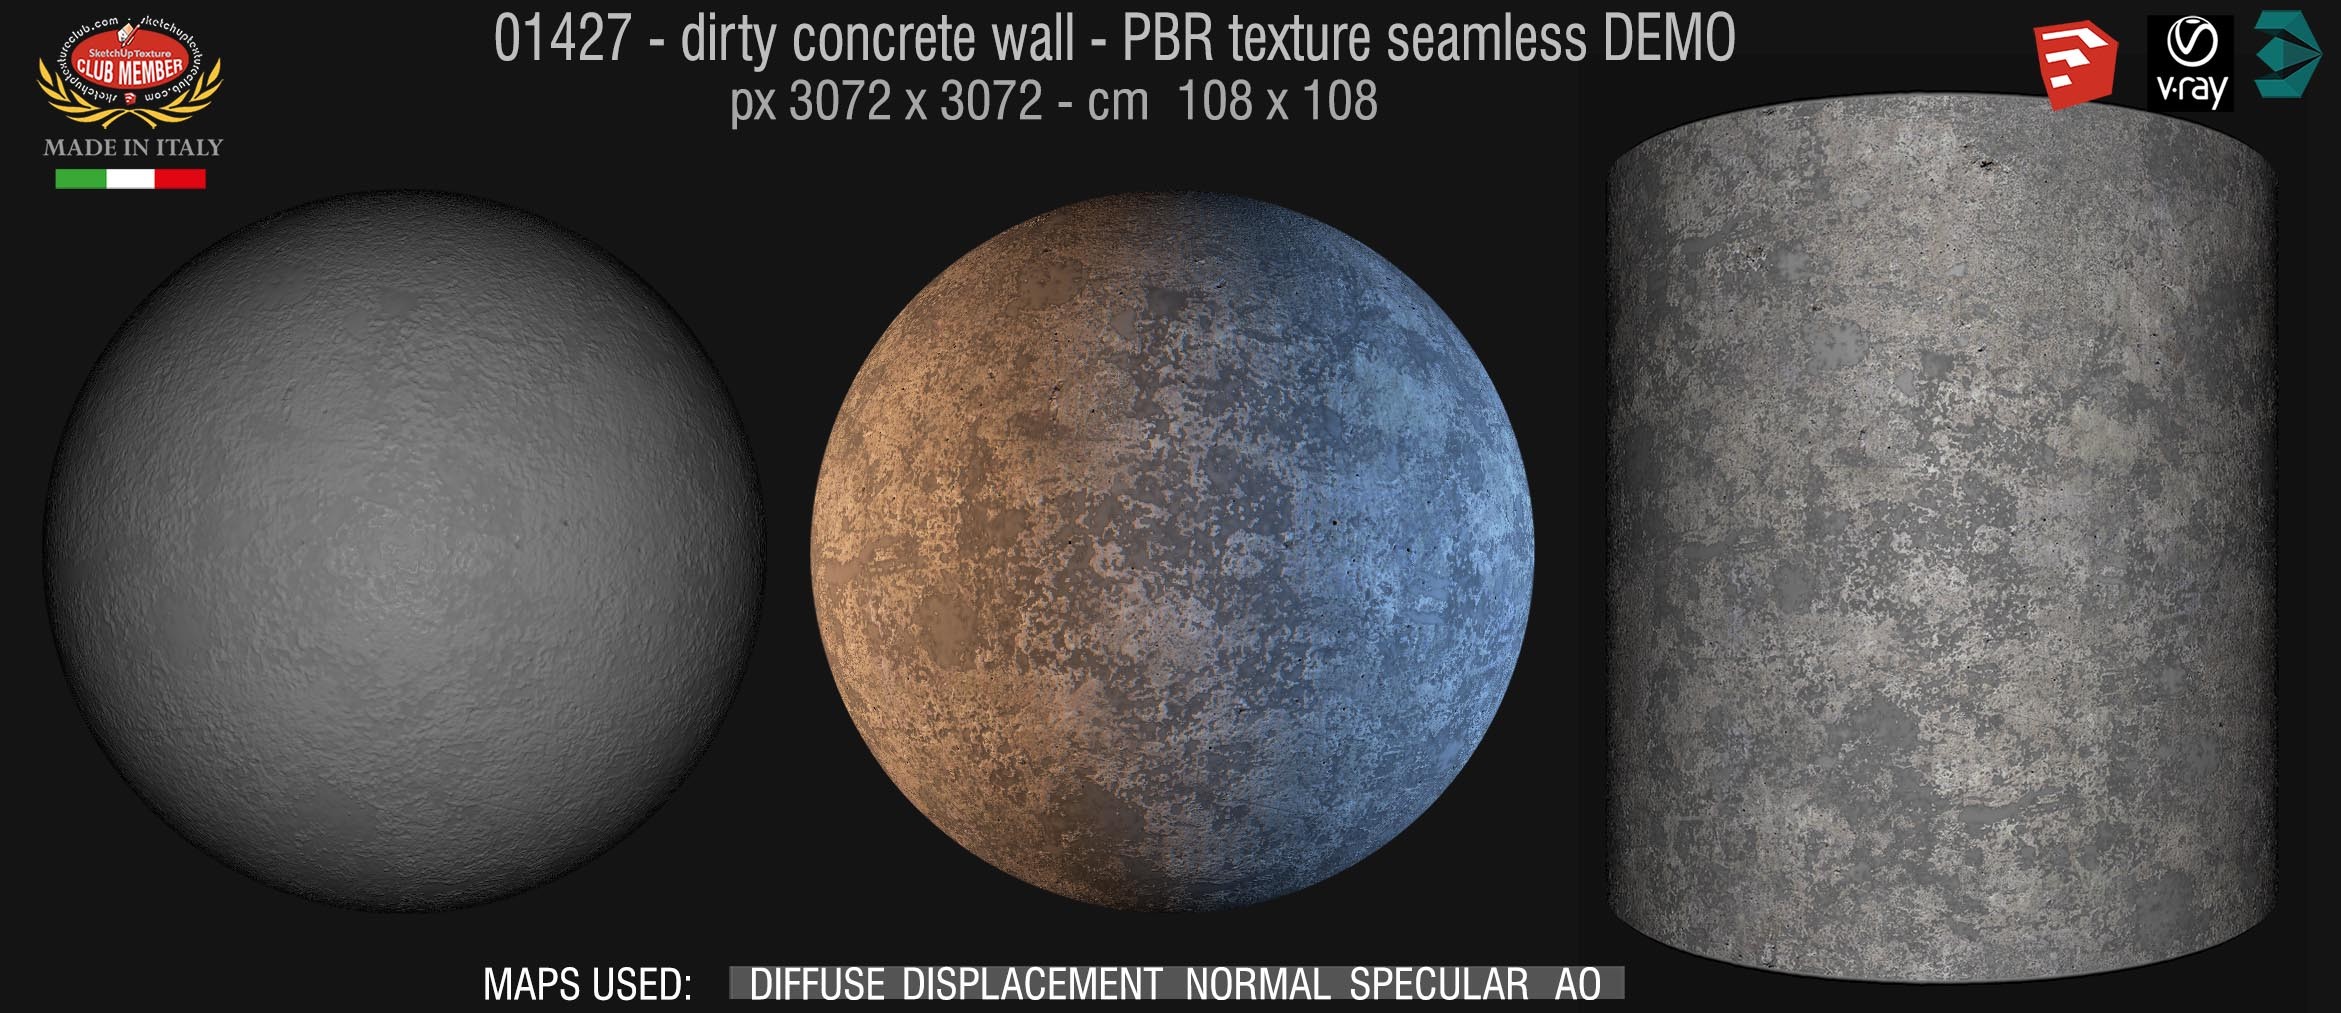 01427  Concrete bare dirty wall PBR texture seamless DEMO